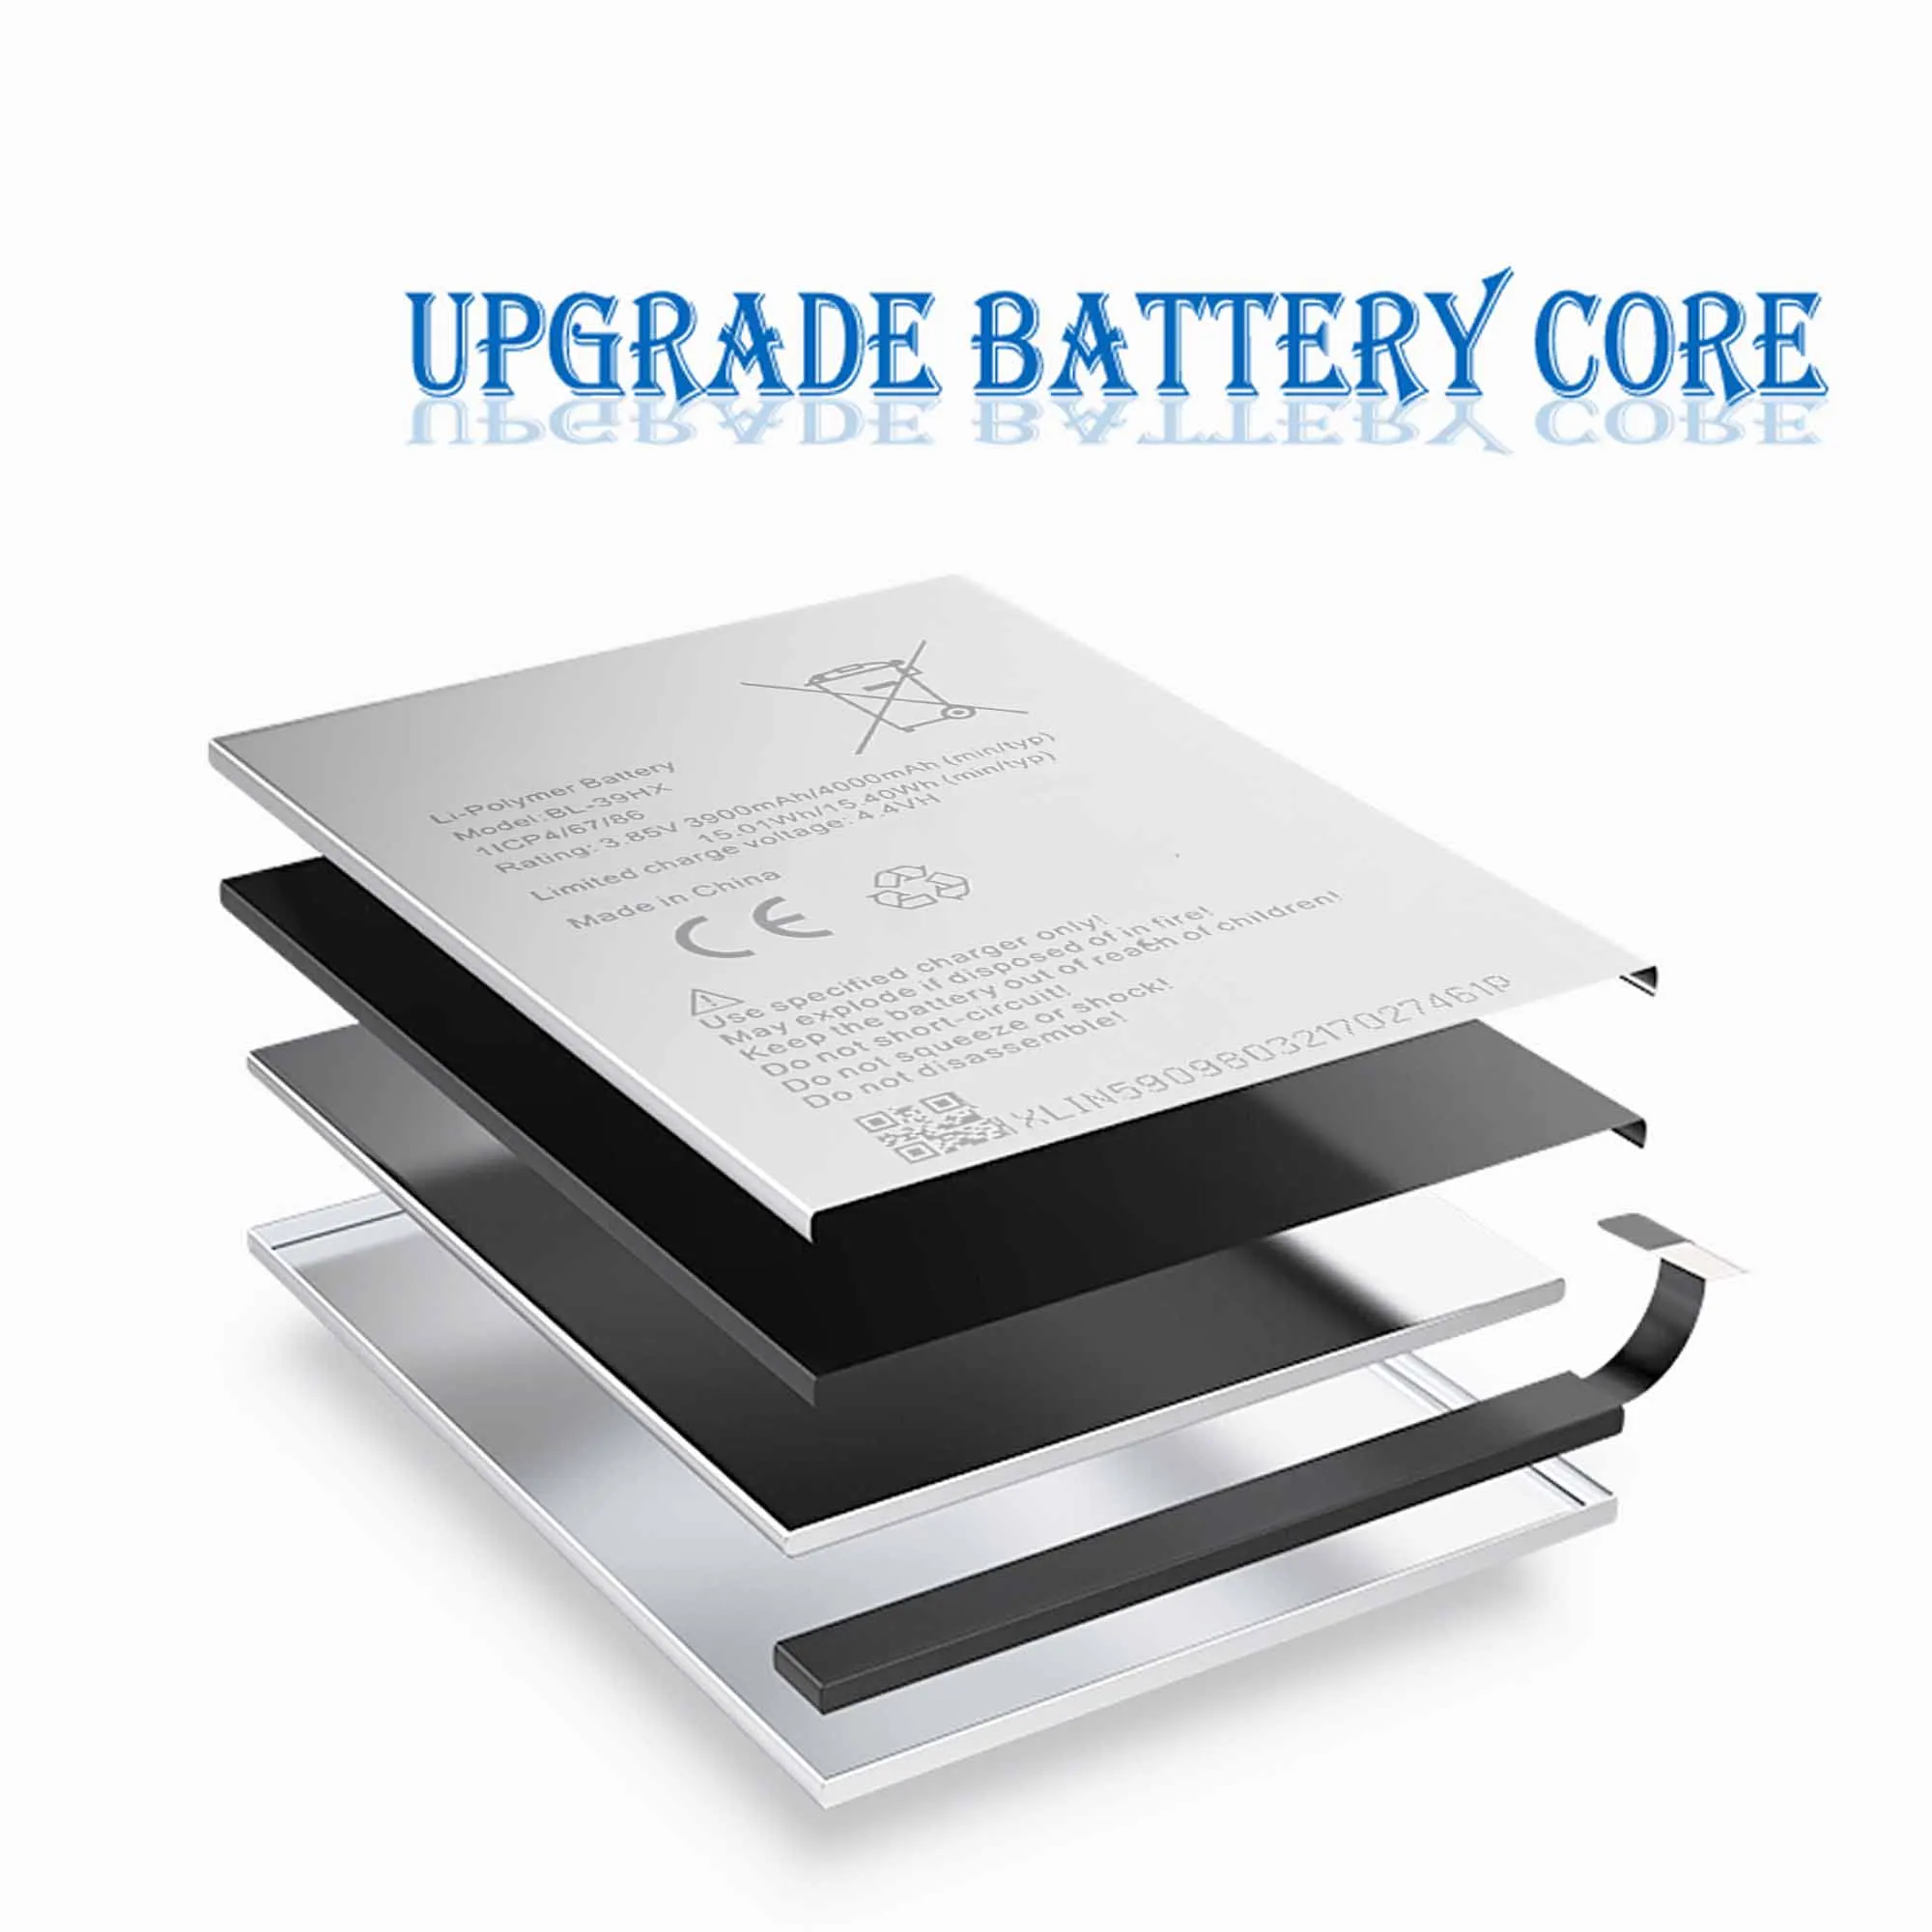 compatible for infinix x606hot 6 bl 39hx 3900mah phone battery series free global shipping